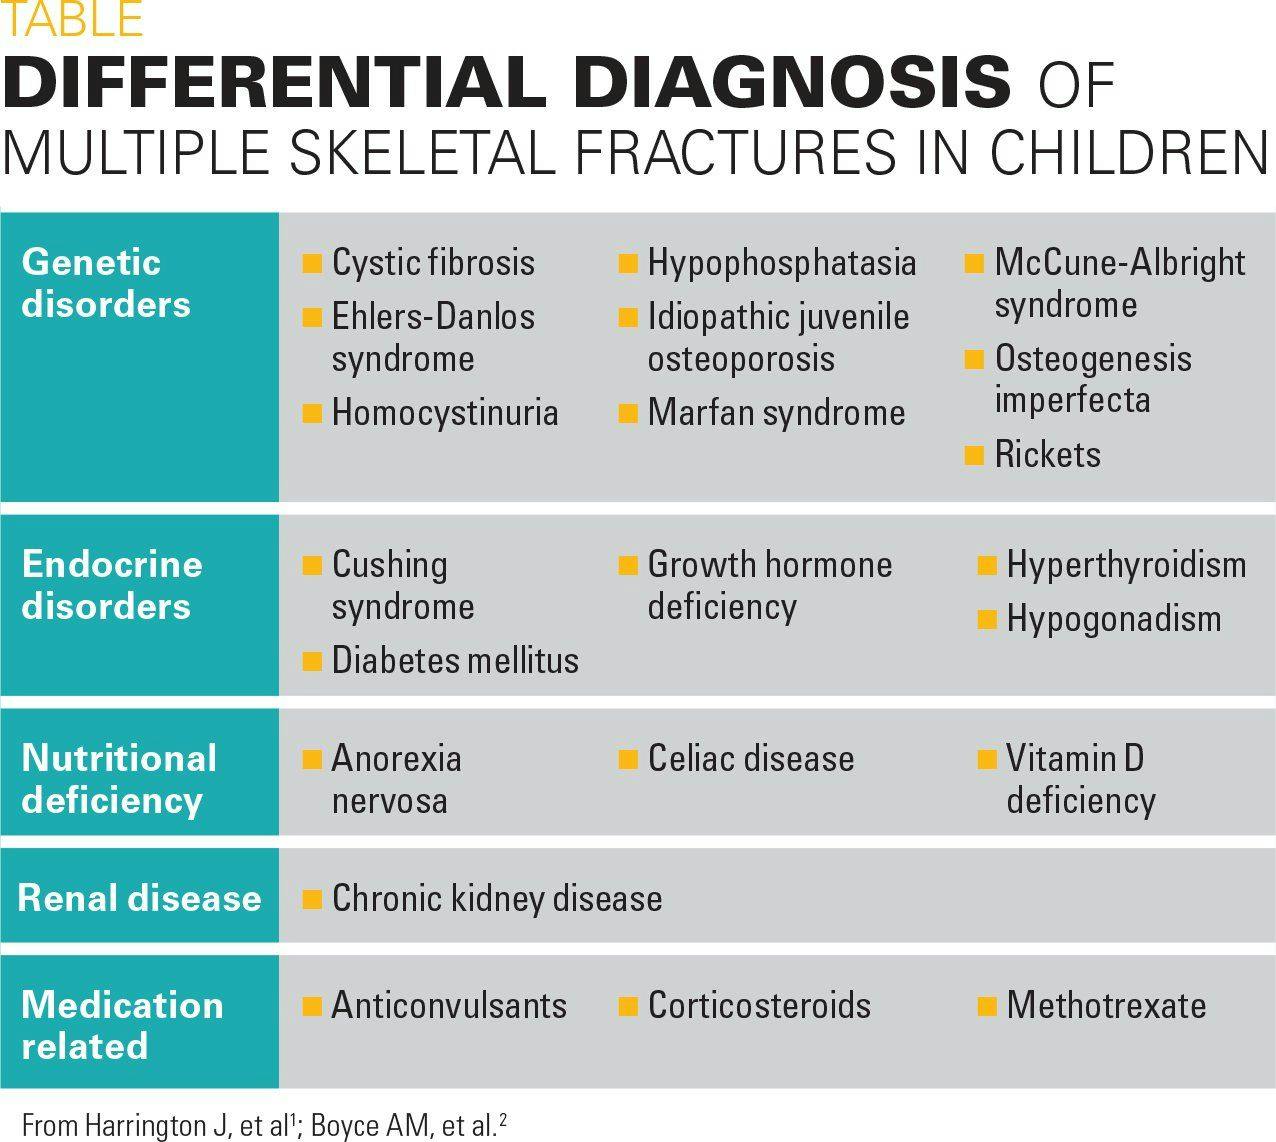 Differential diagnosis of multiple skeletal fractures in children